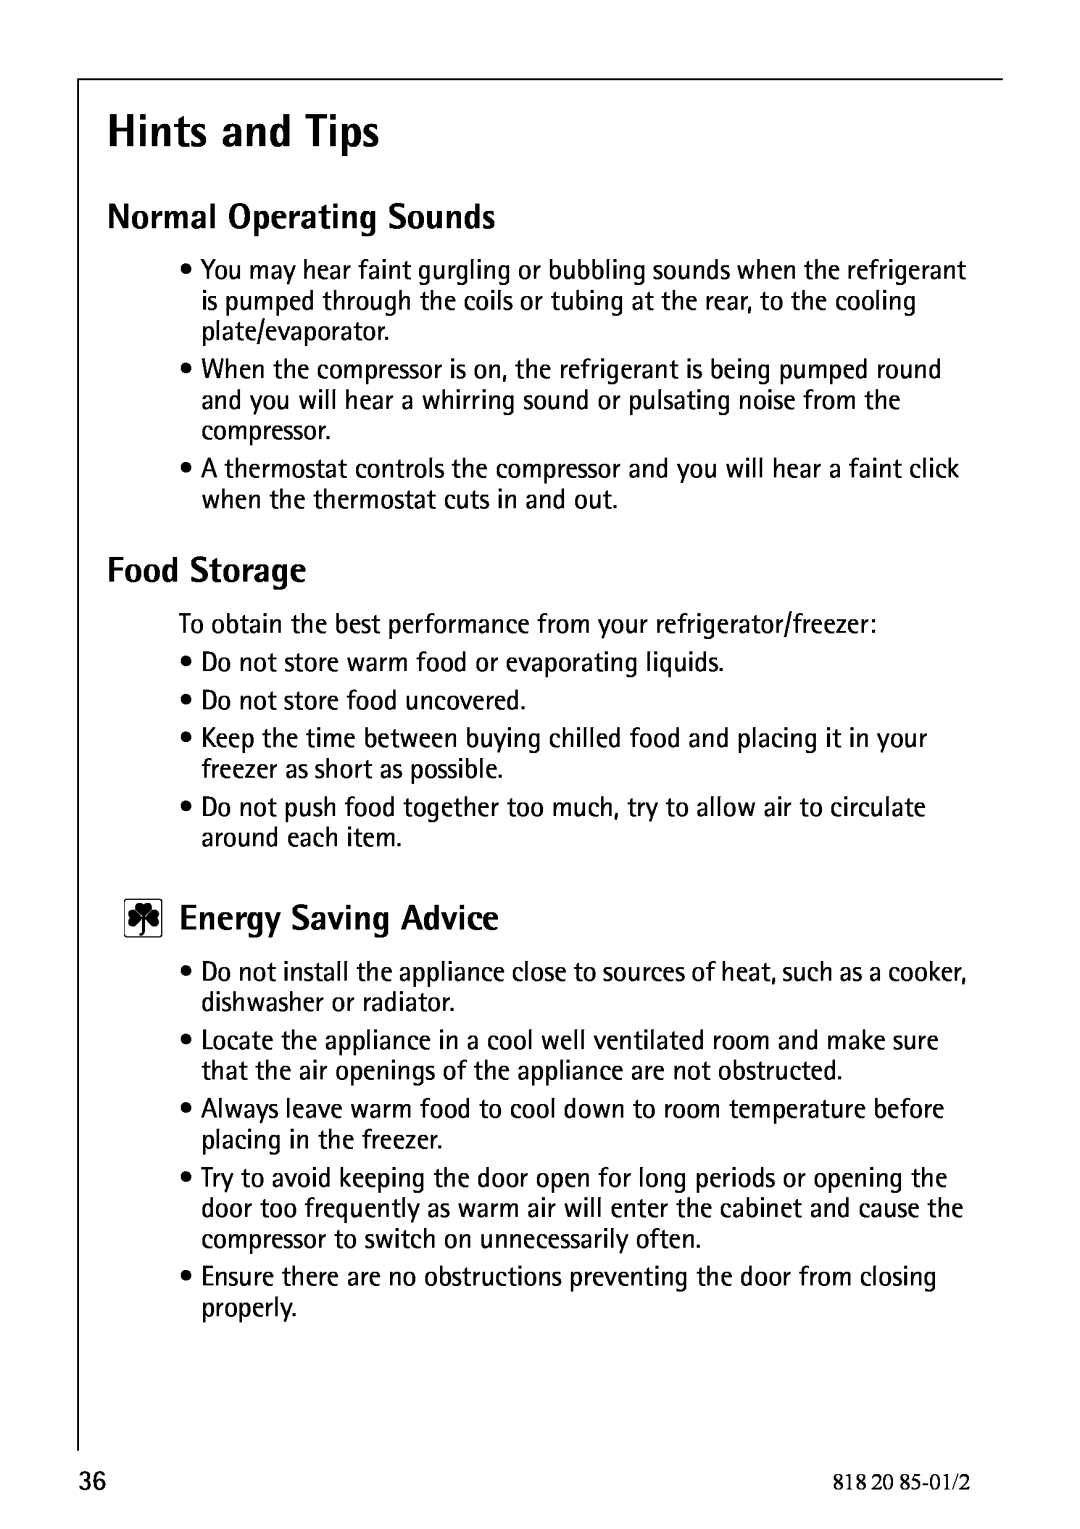 Electrolux 818 20 85 operating instructions Hints and Tips, Normal Operating Sounds, Food Storage, Energy Saving Advice 